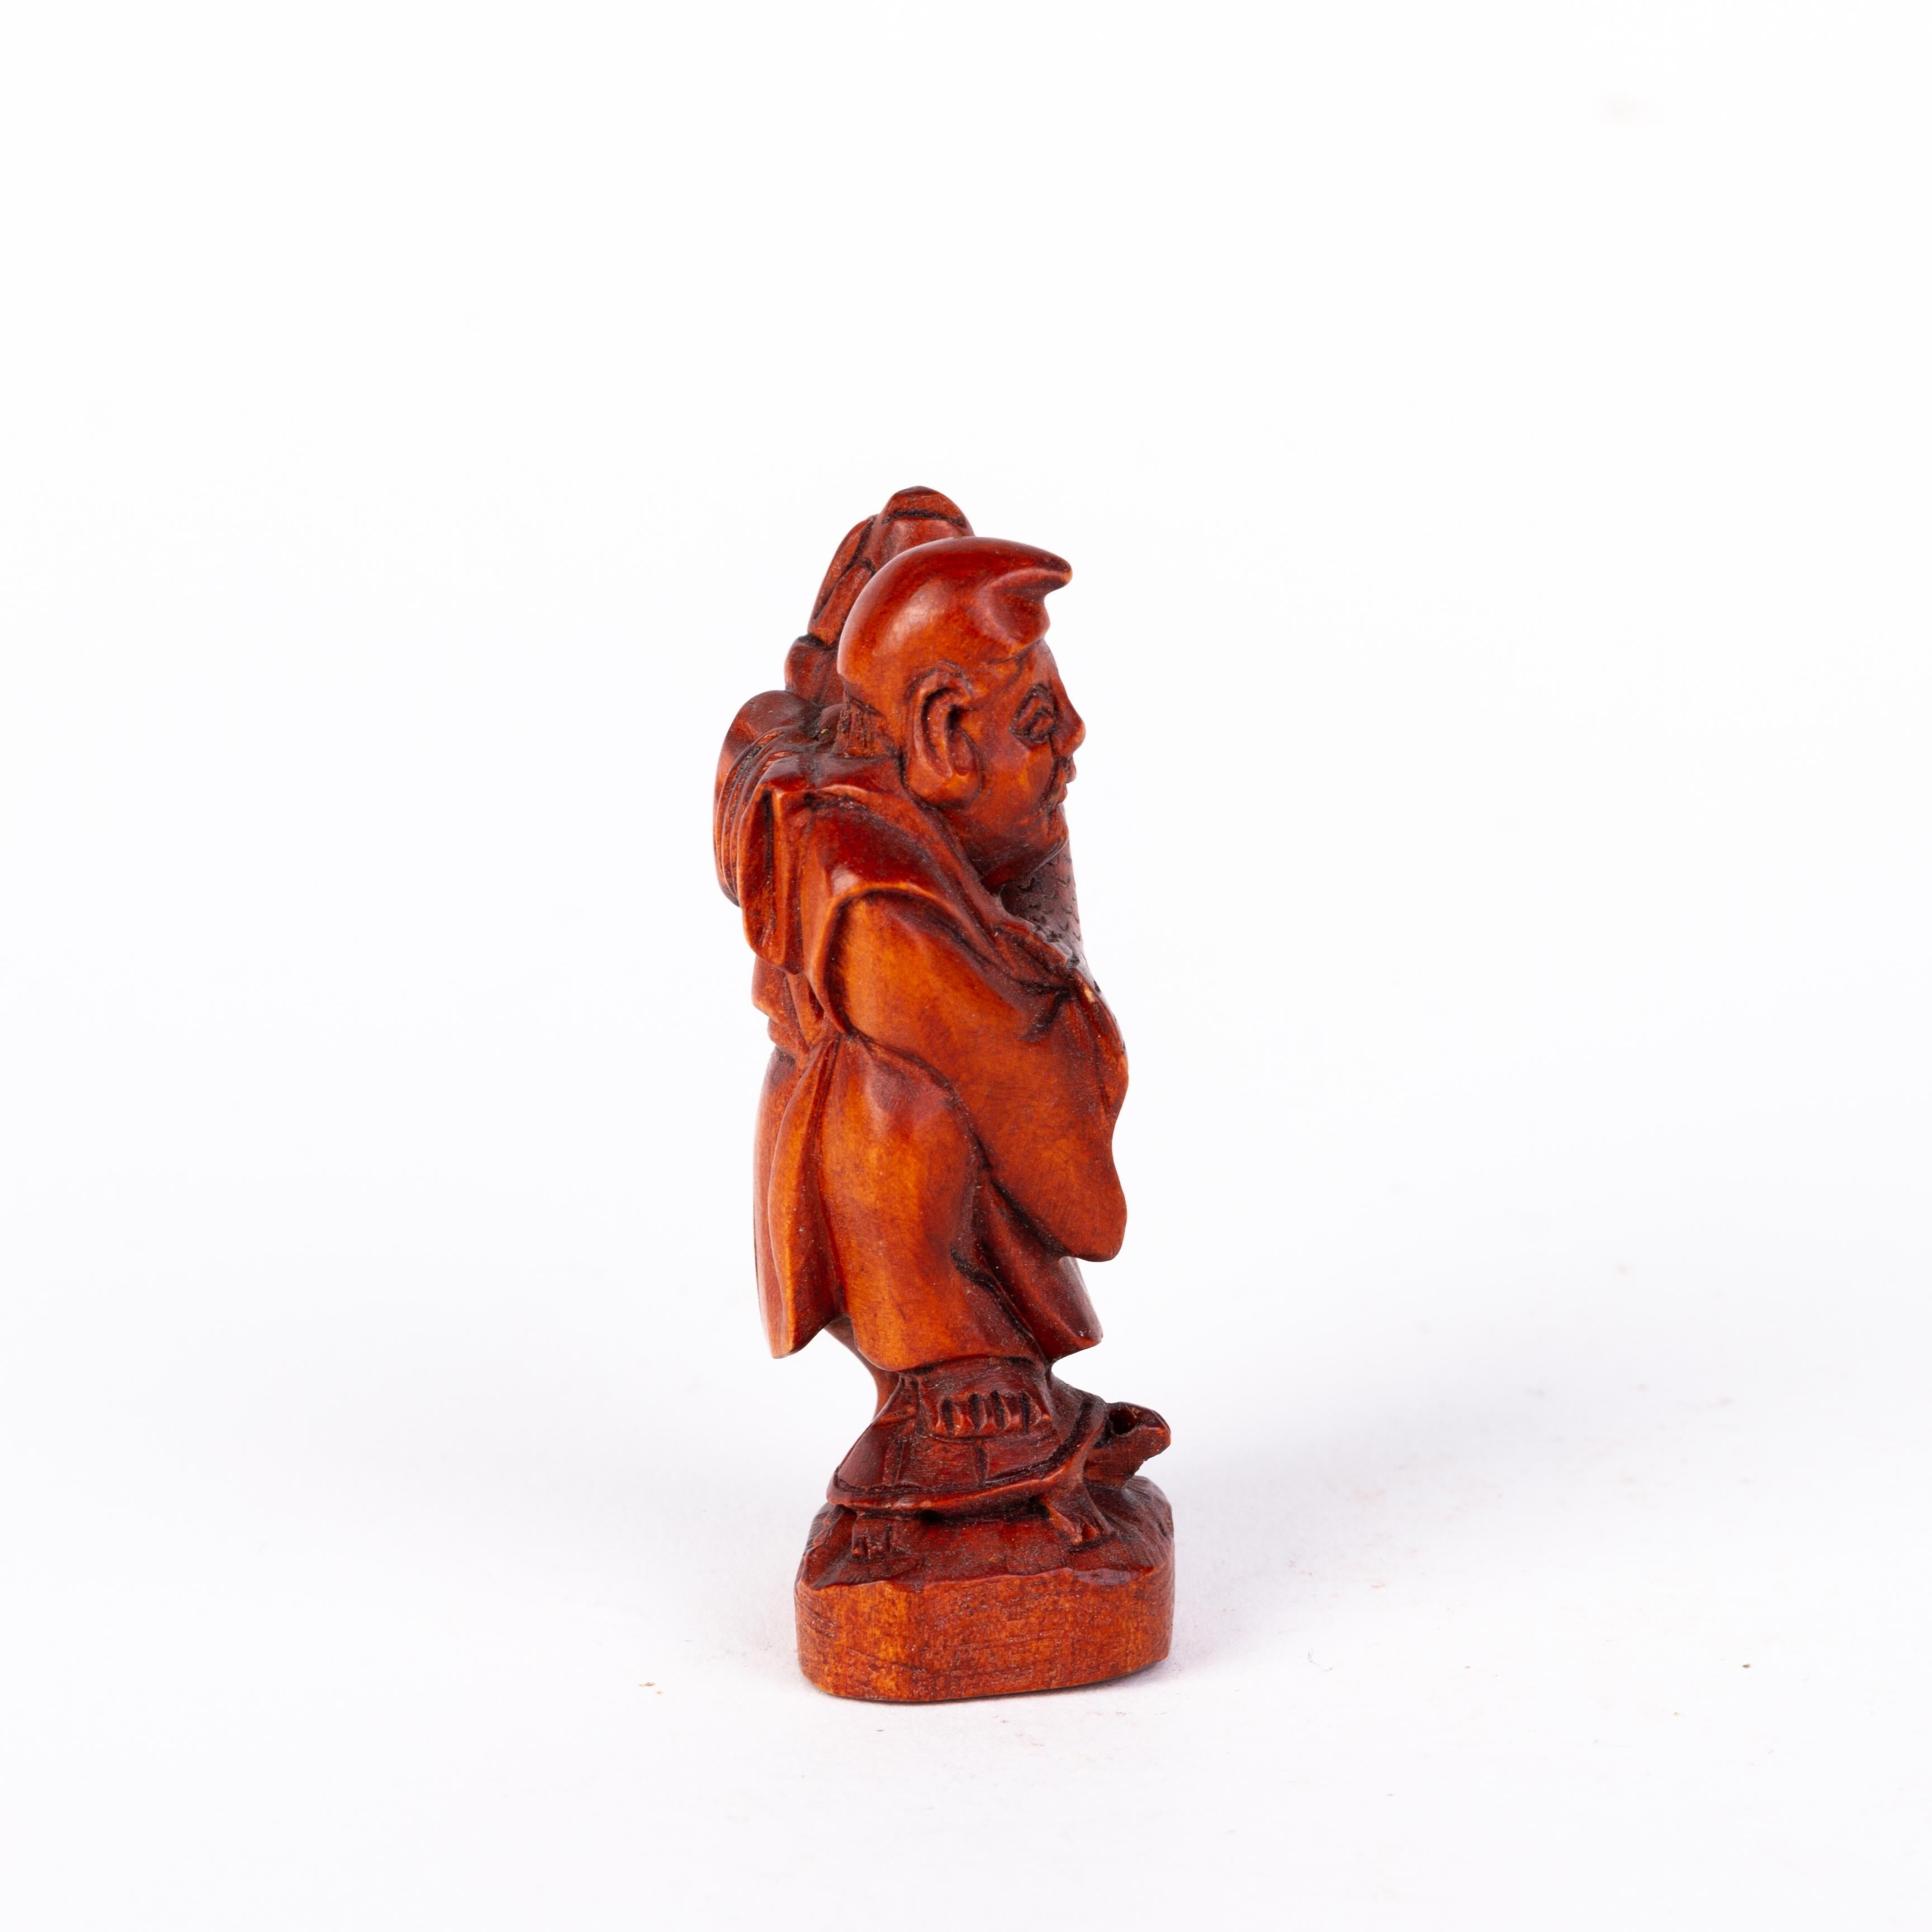 Japanese Carved boxwood Netsuke Inro Ojime, signed
Very good condition.
From a private collection.
Free international shipping.